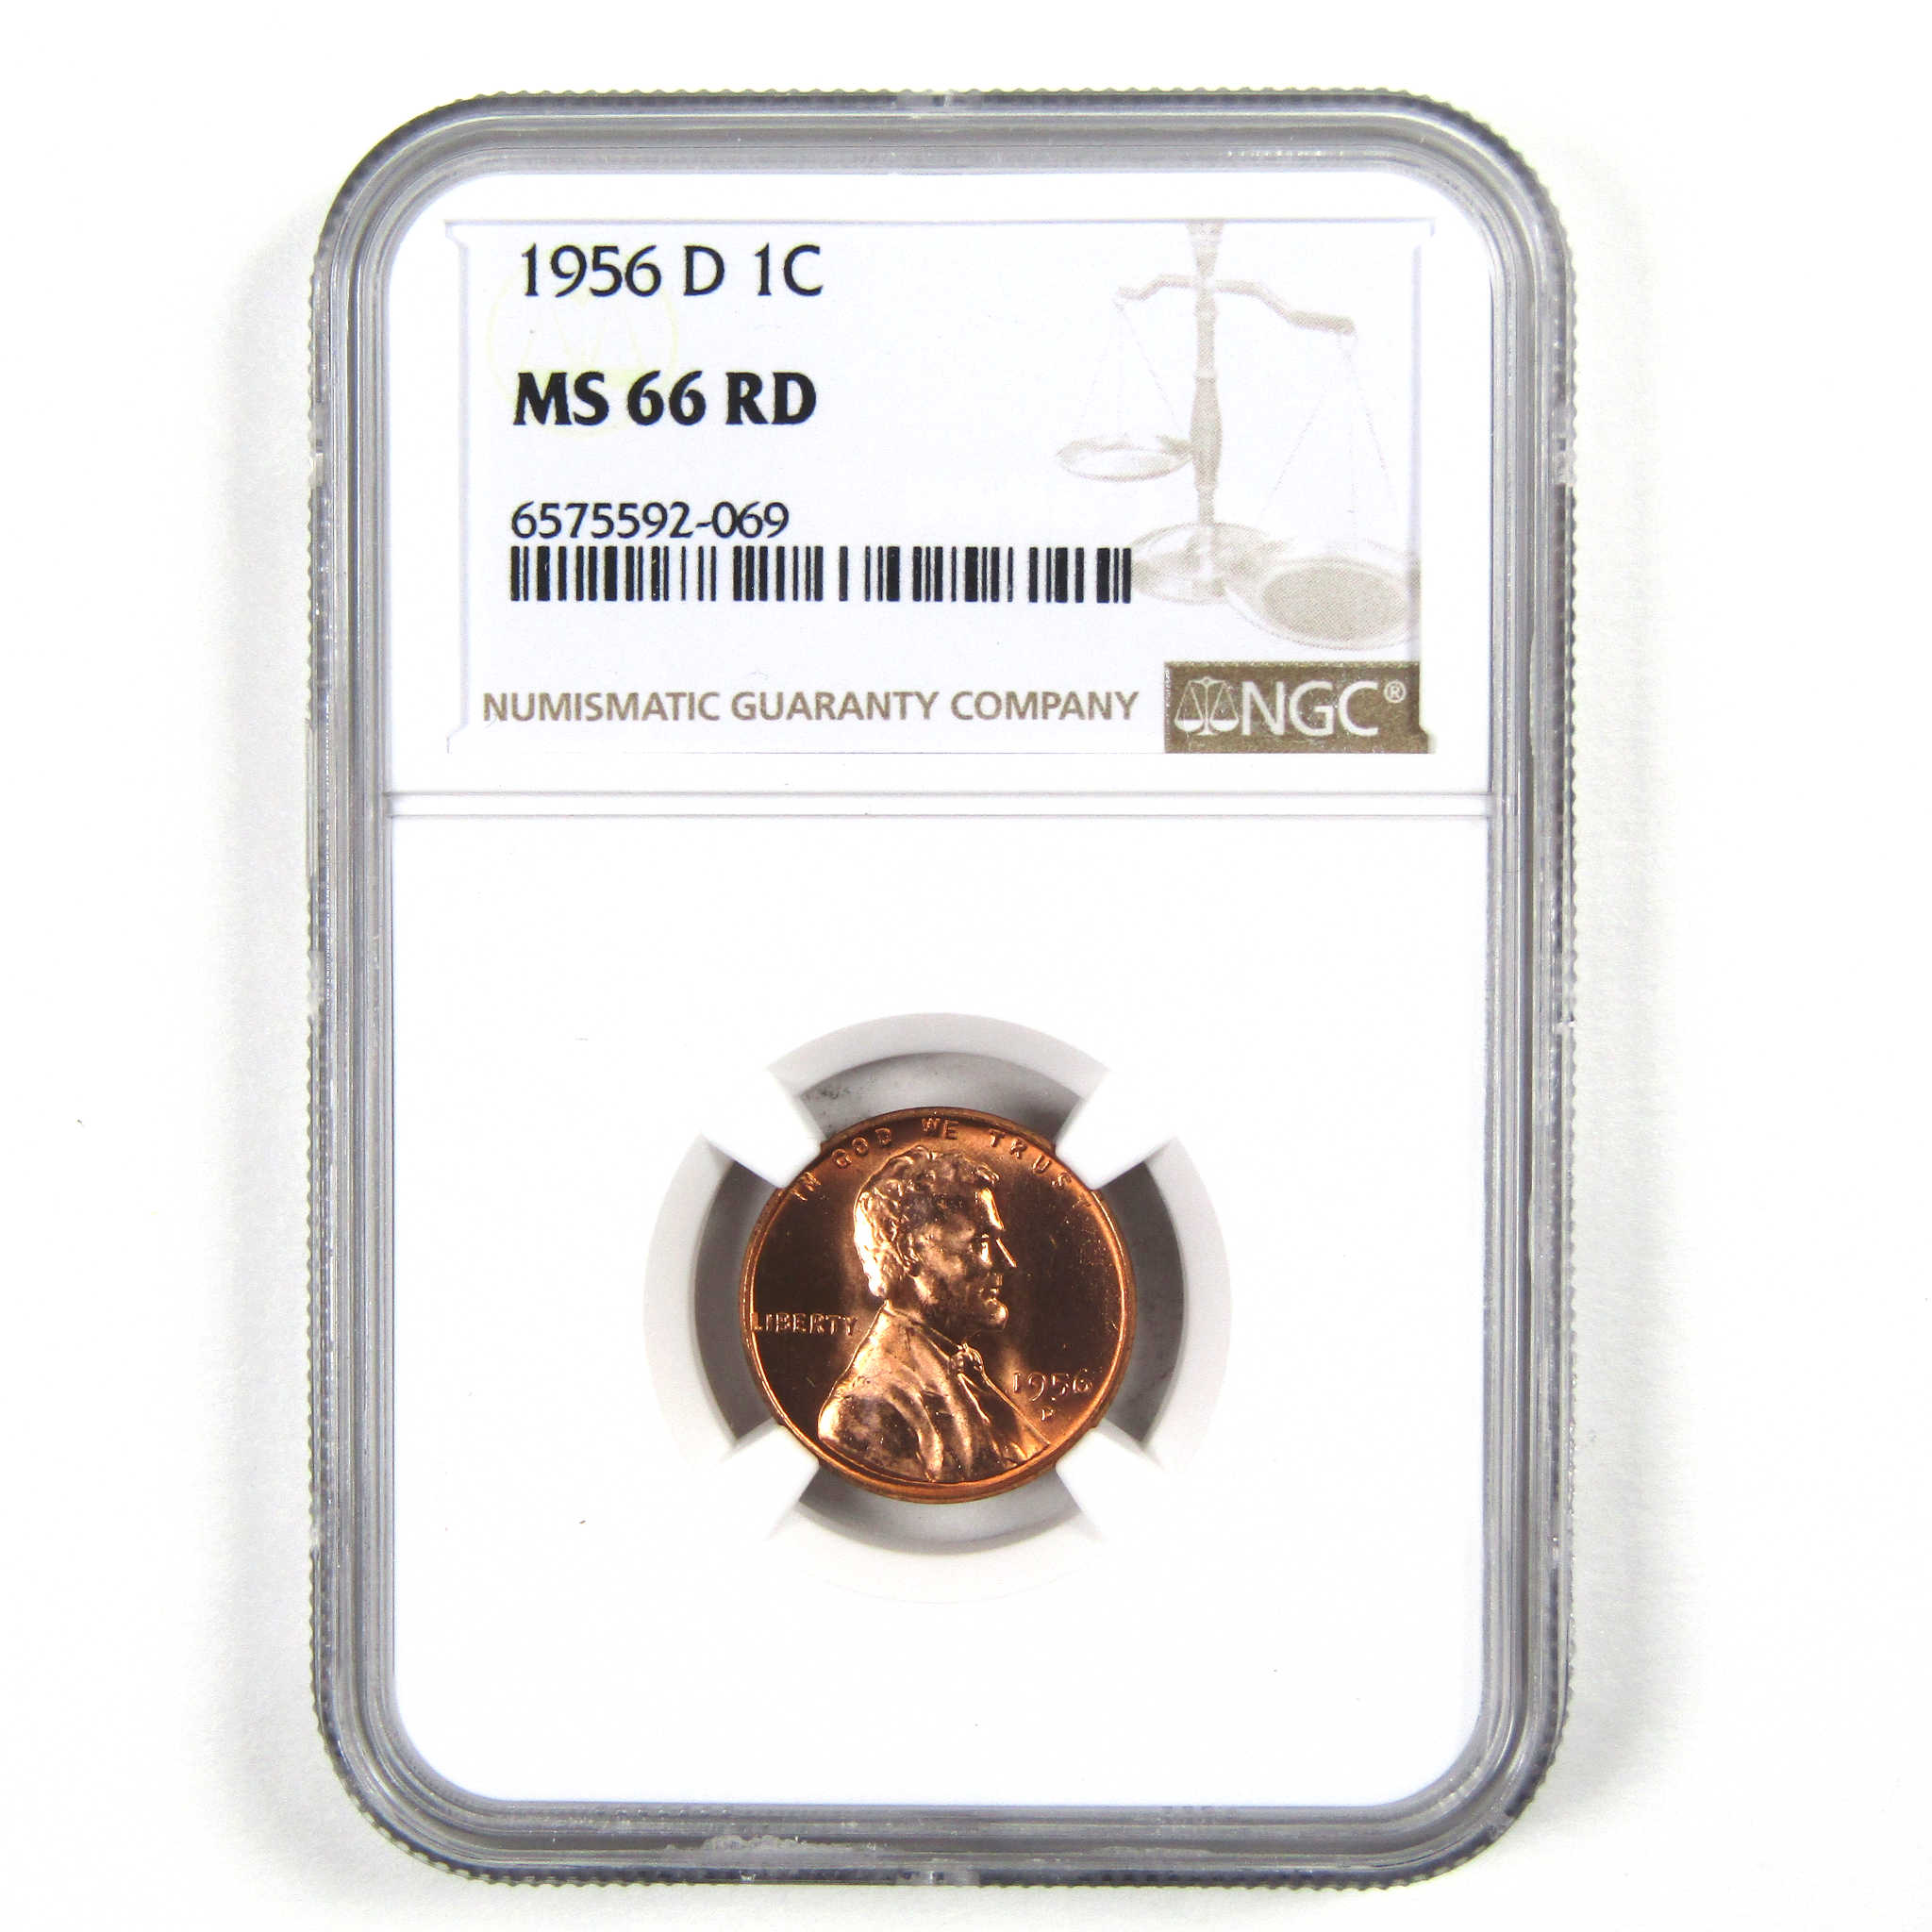 1956 D Lincoln Wheat Cent MS 66 RD NGC Penny Uncirculated SKU:I3659